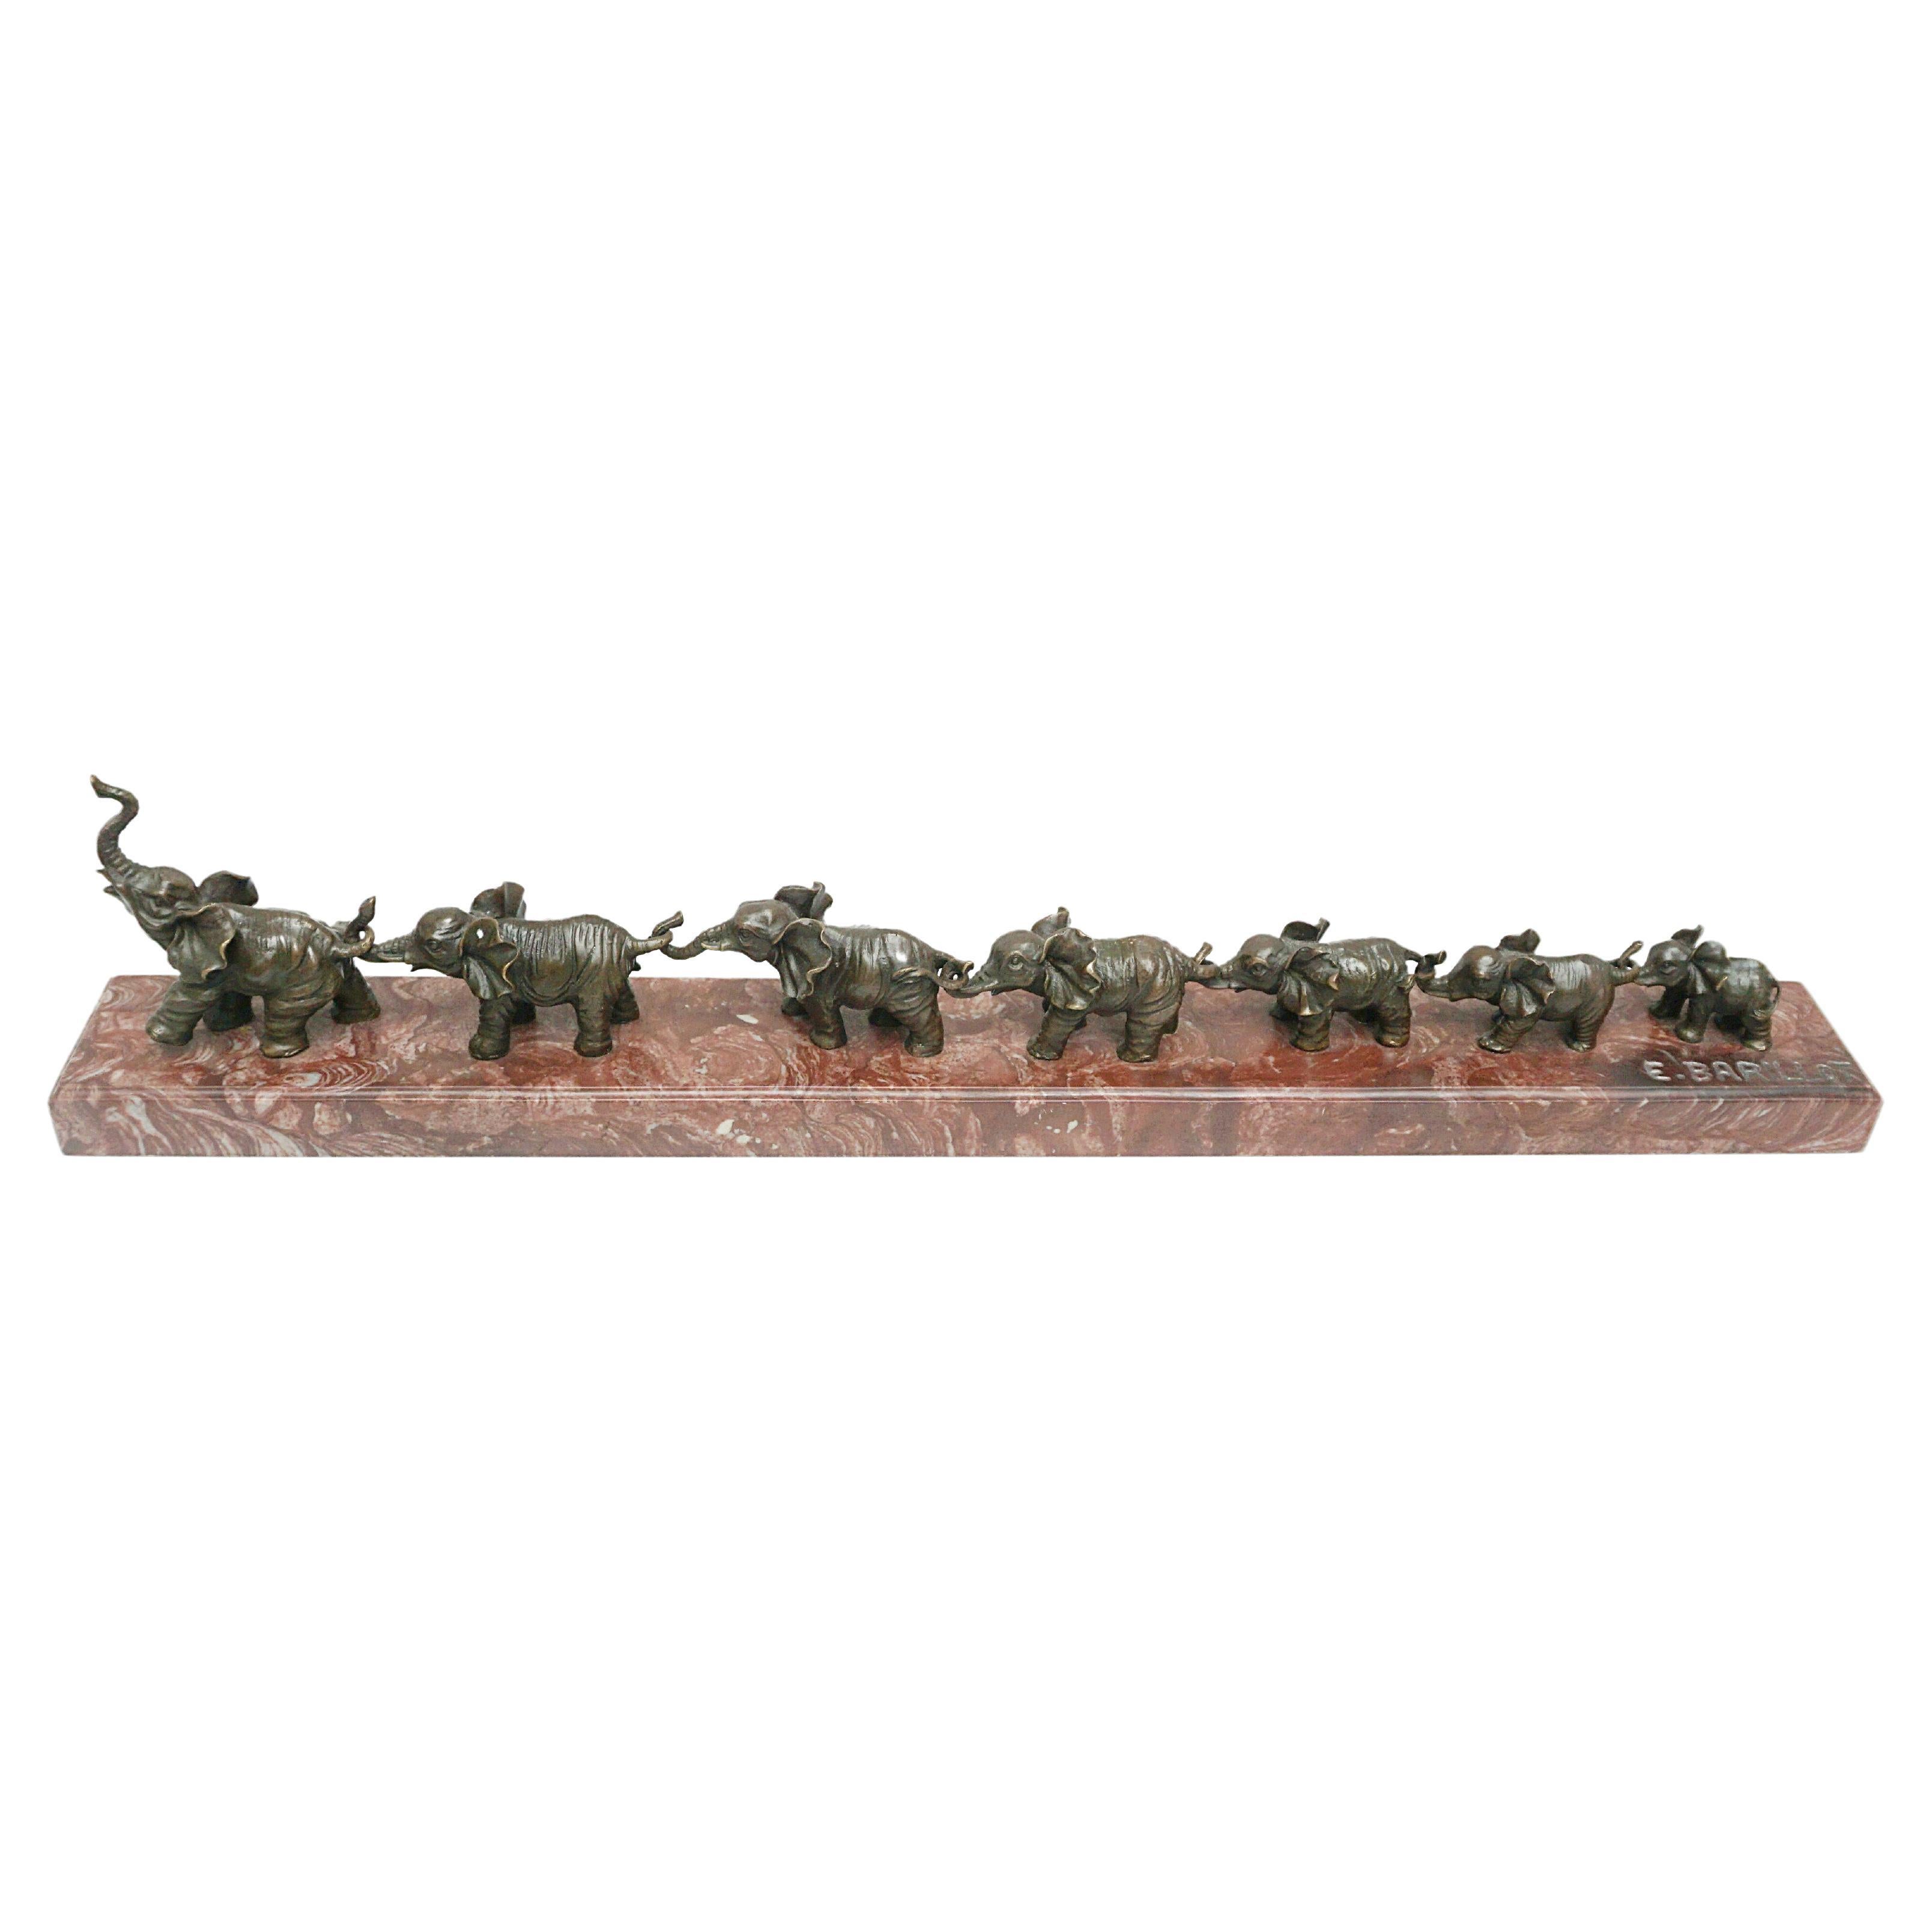 Contemporary Bronze Sculpture of a Herd of Elephants on a Marble Base